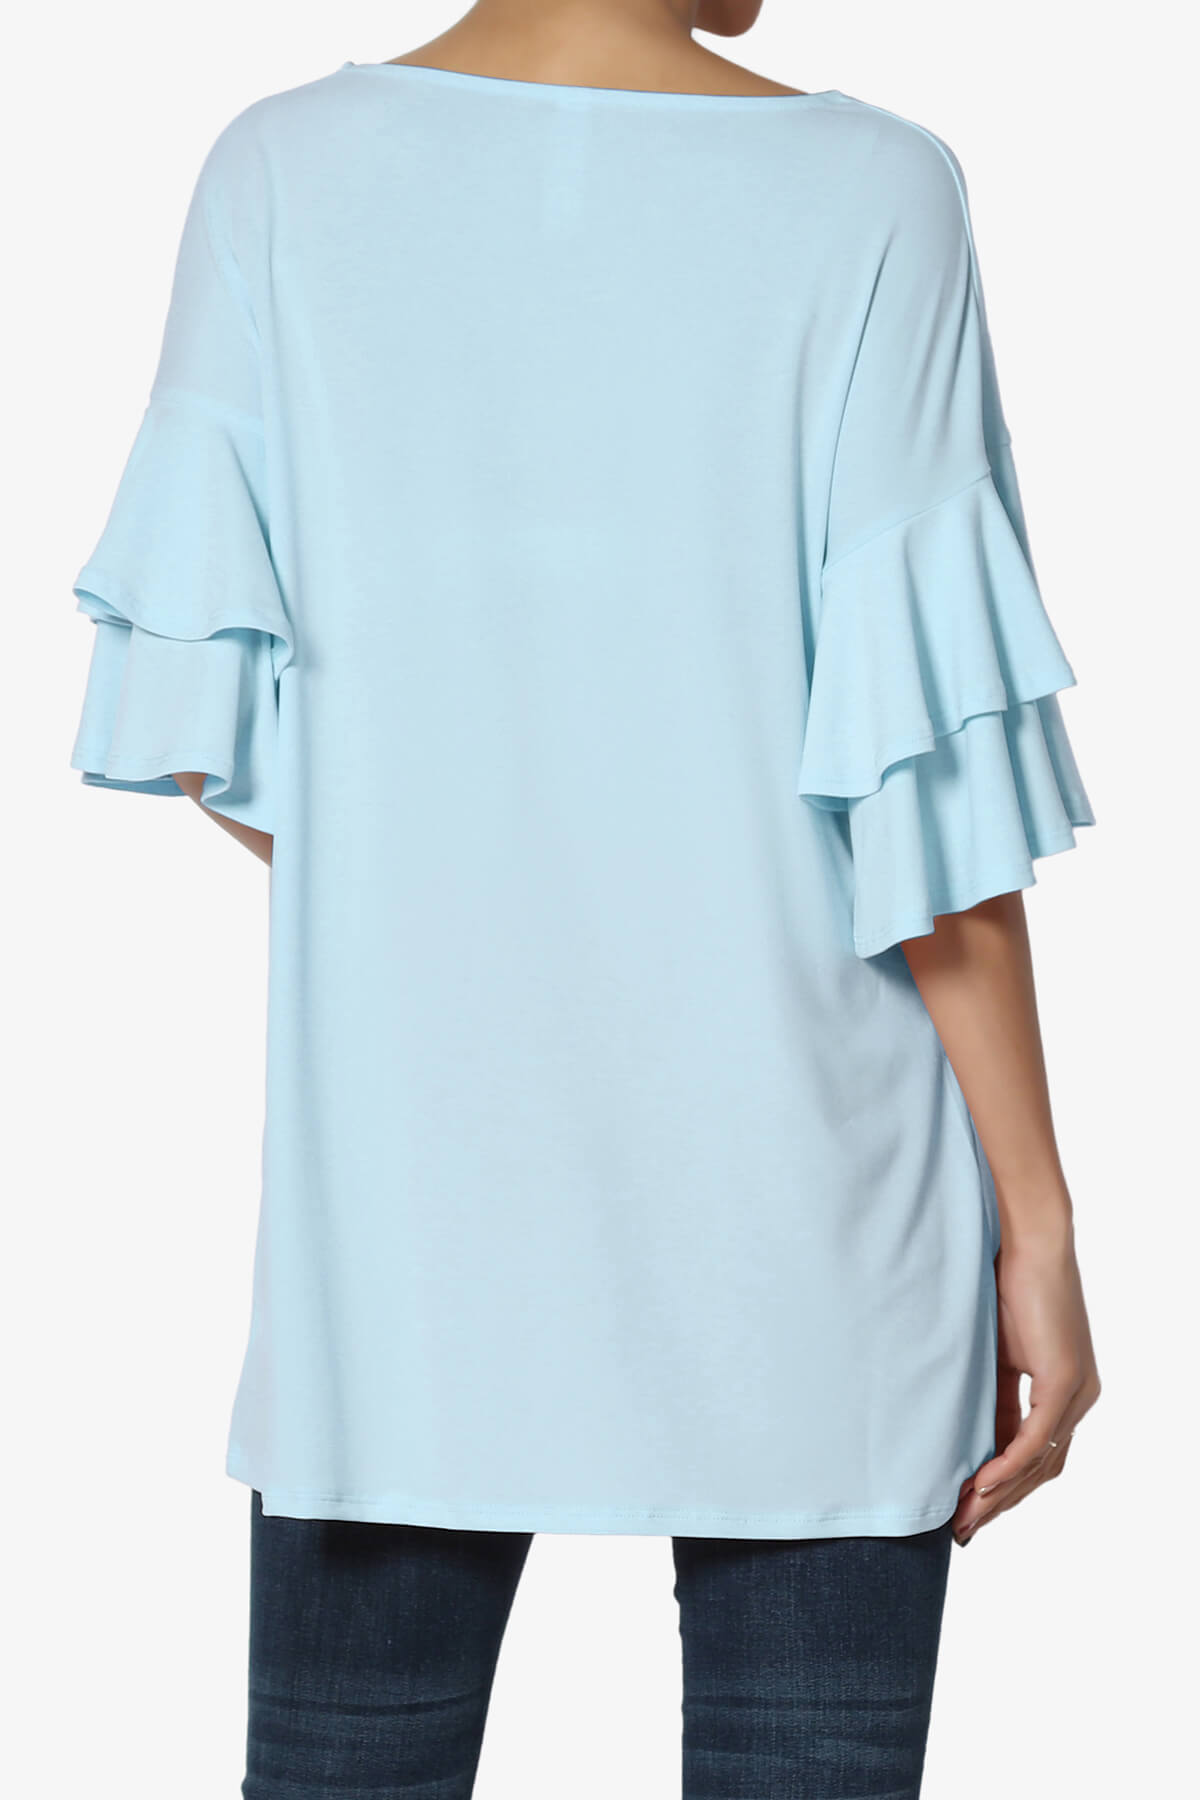 Casual 3/4 Tiered Bell Sleeve Boat Neck Loose Top T-Shirt Blouse Shirt –  TheMogan